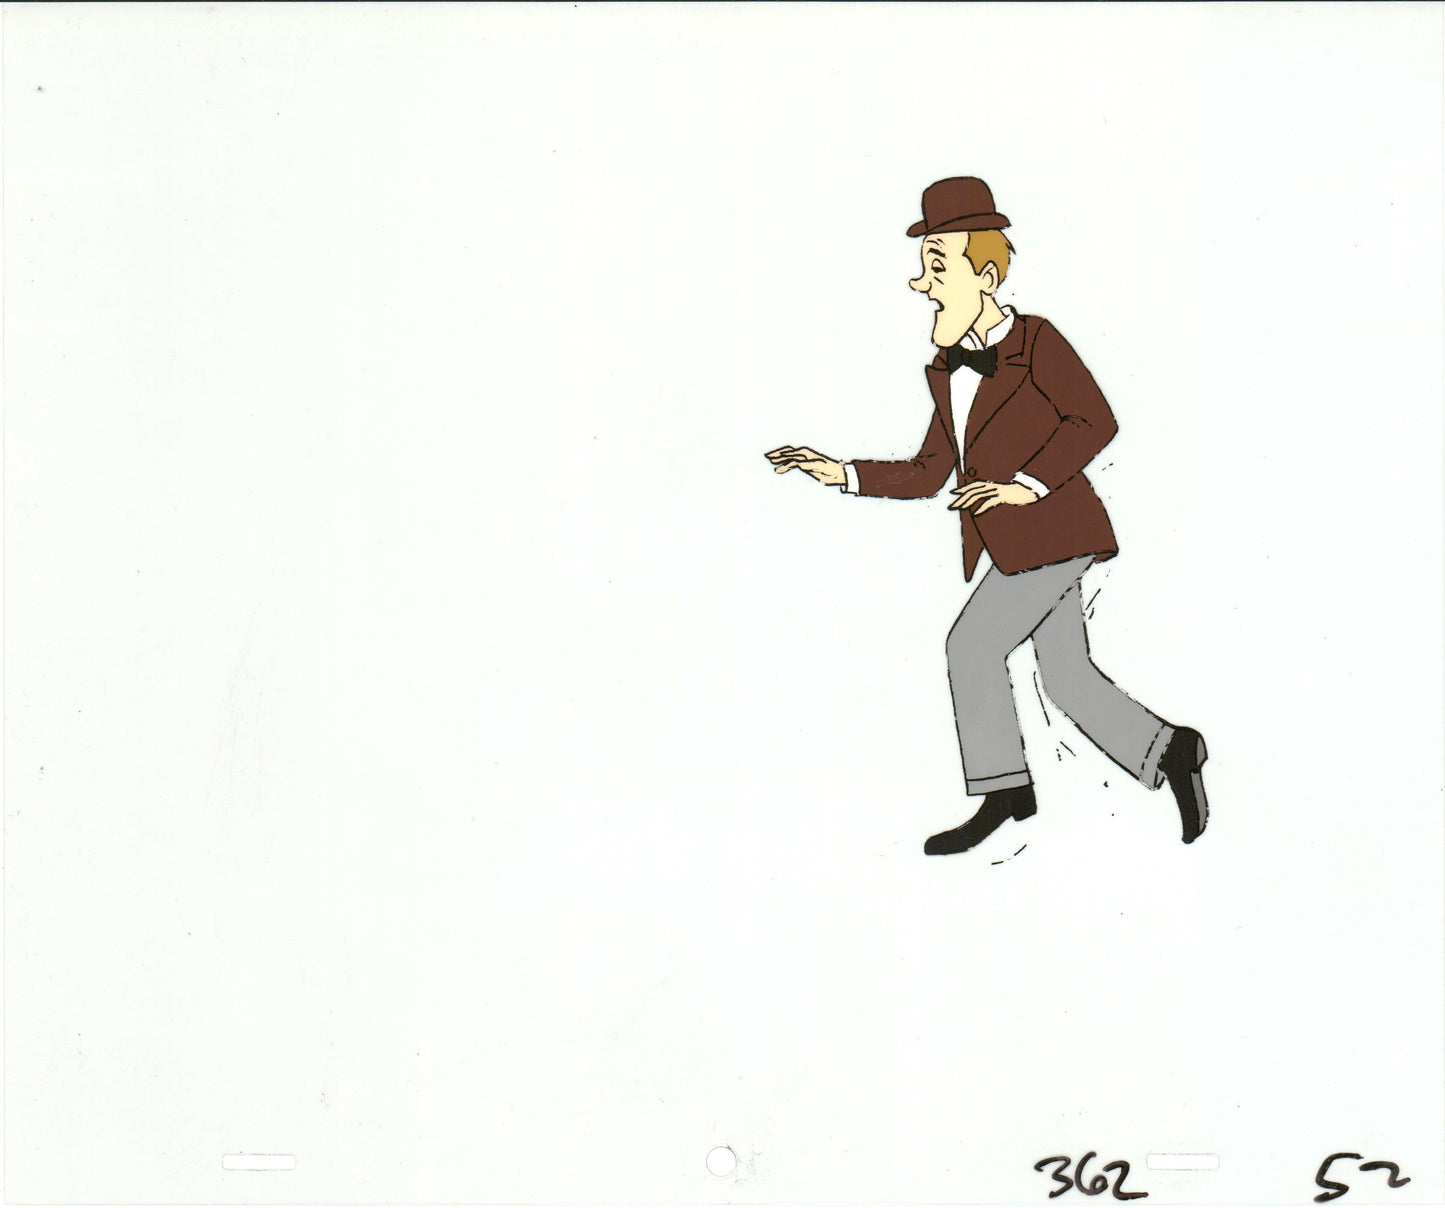 SCOOBY DOO 1972 Stan Laurel Production Animation Cel from Hanna Barbera 264